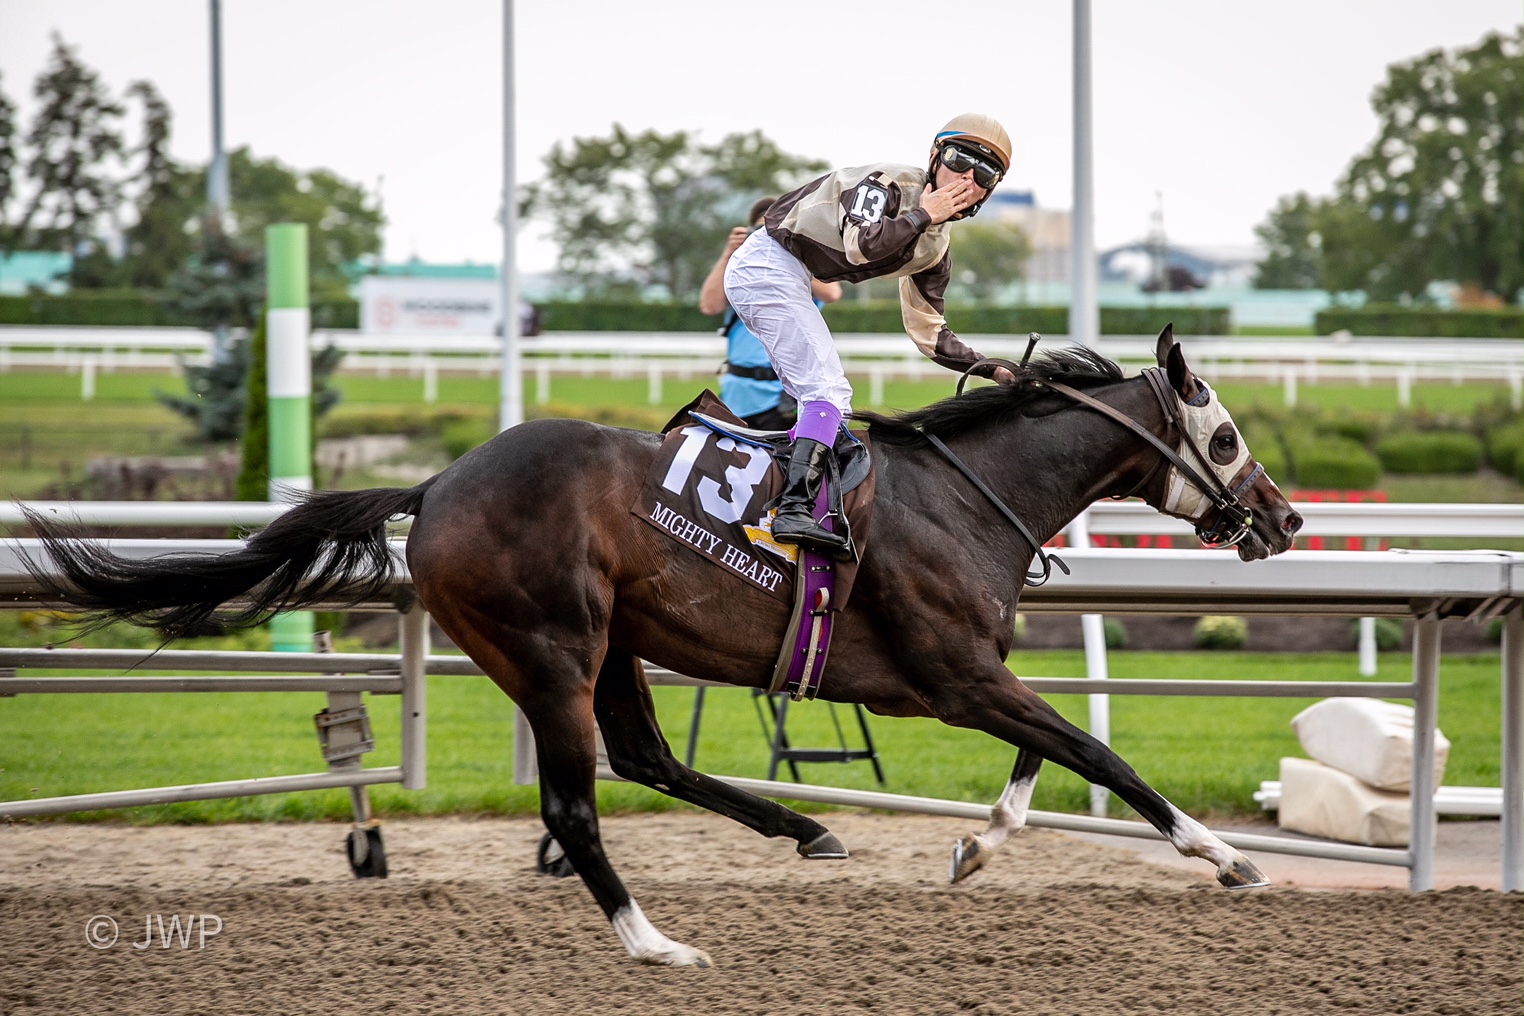 One-eyed Mighty Heart mighty in Queen’s Plate triumph, Carroll finishes one-two